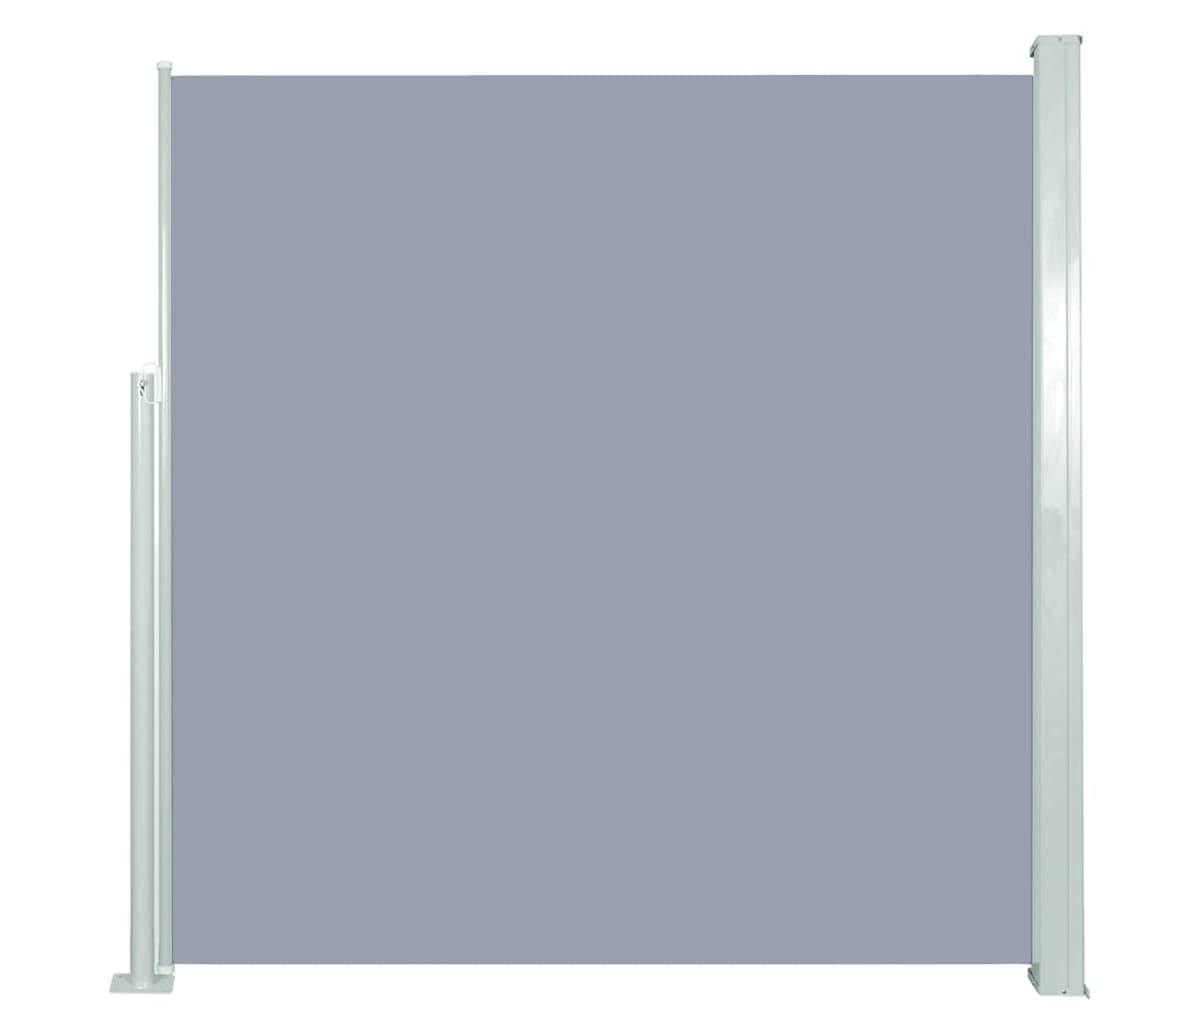 Retractable Side Awning 55.1"x118.1" Gray - Grey